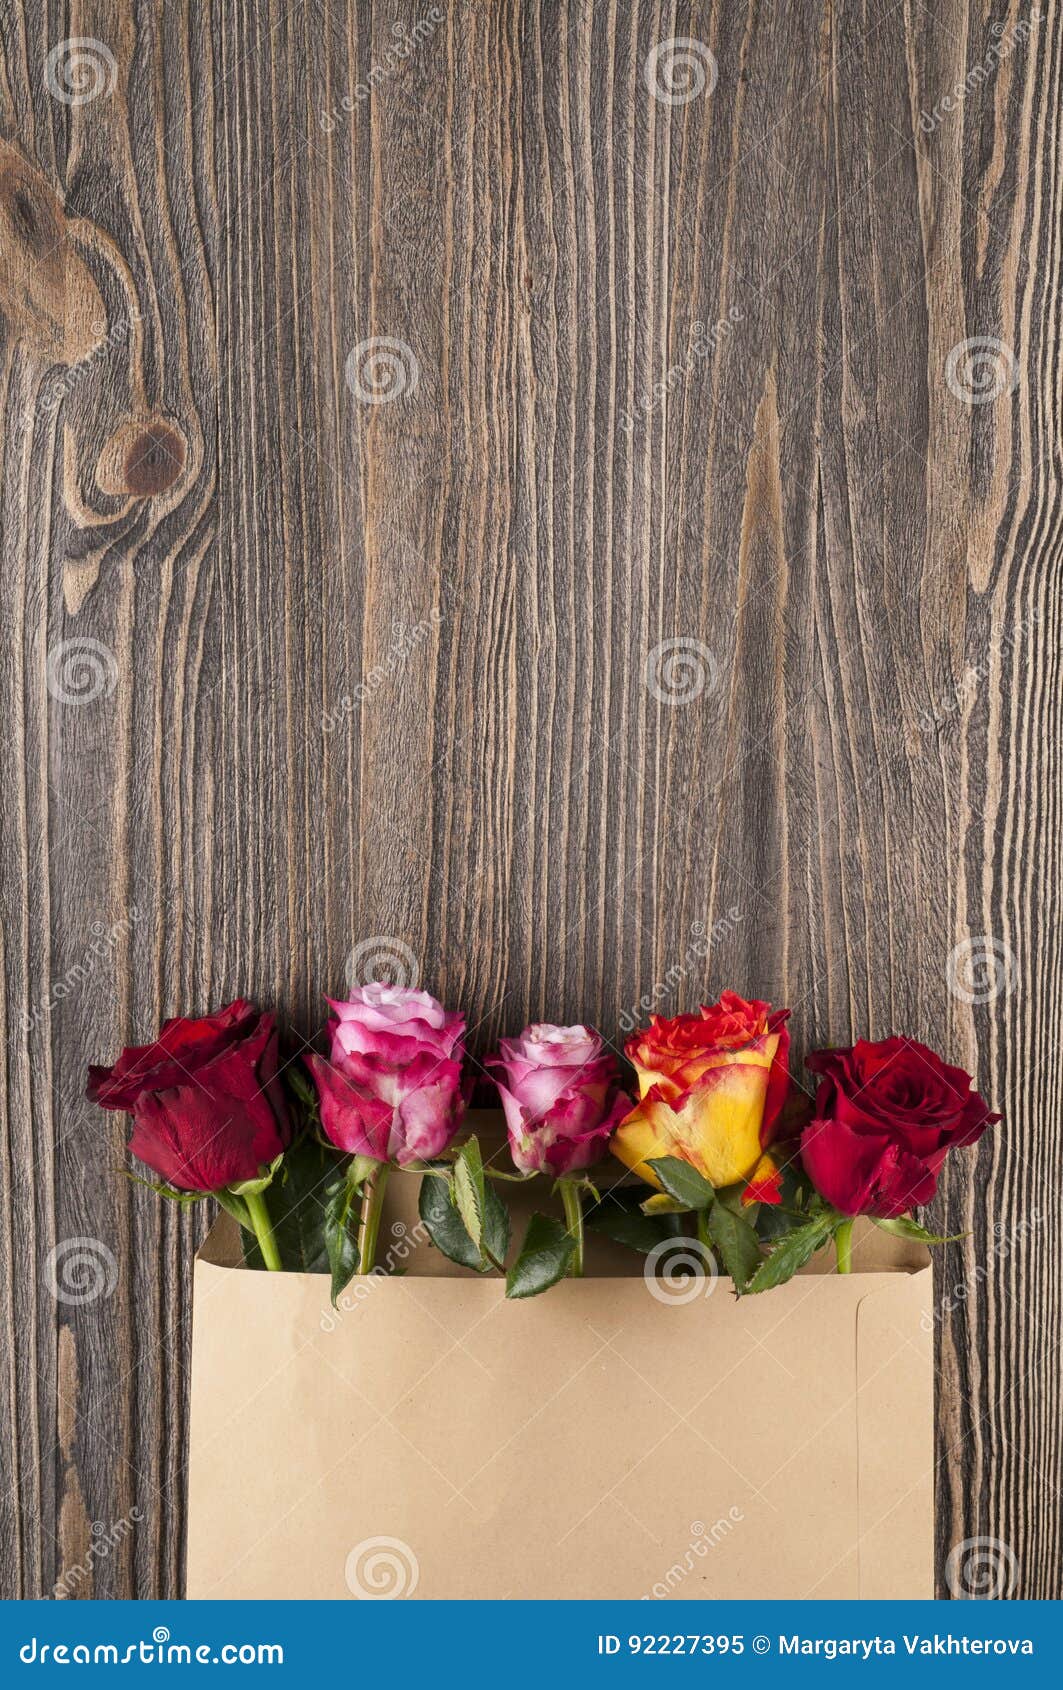 Download Bunch Of Multicolor Rose Flowers In Paper Envelope Over ...